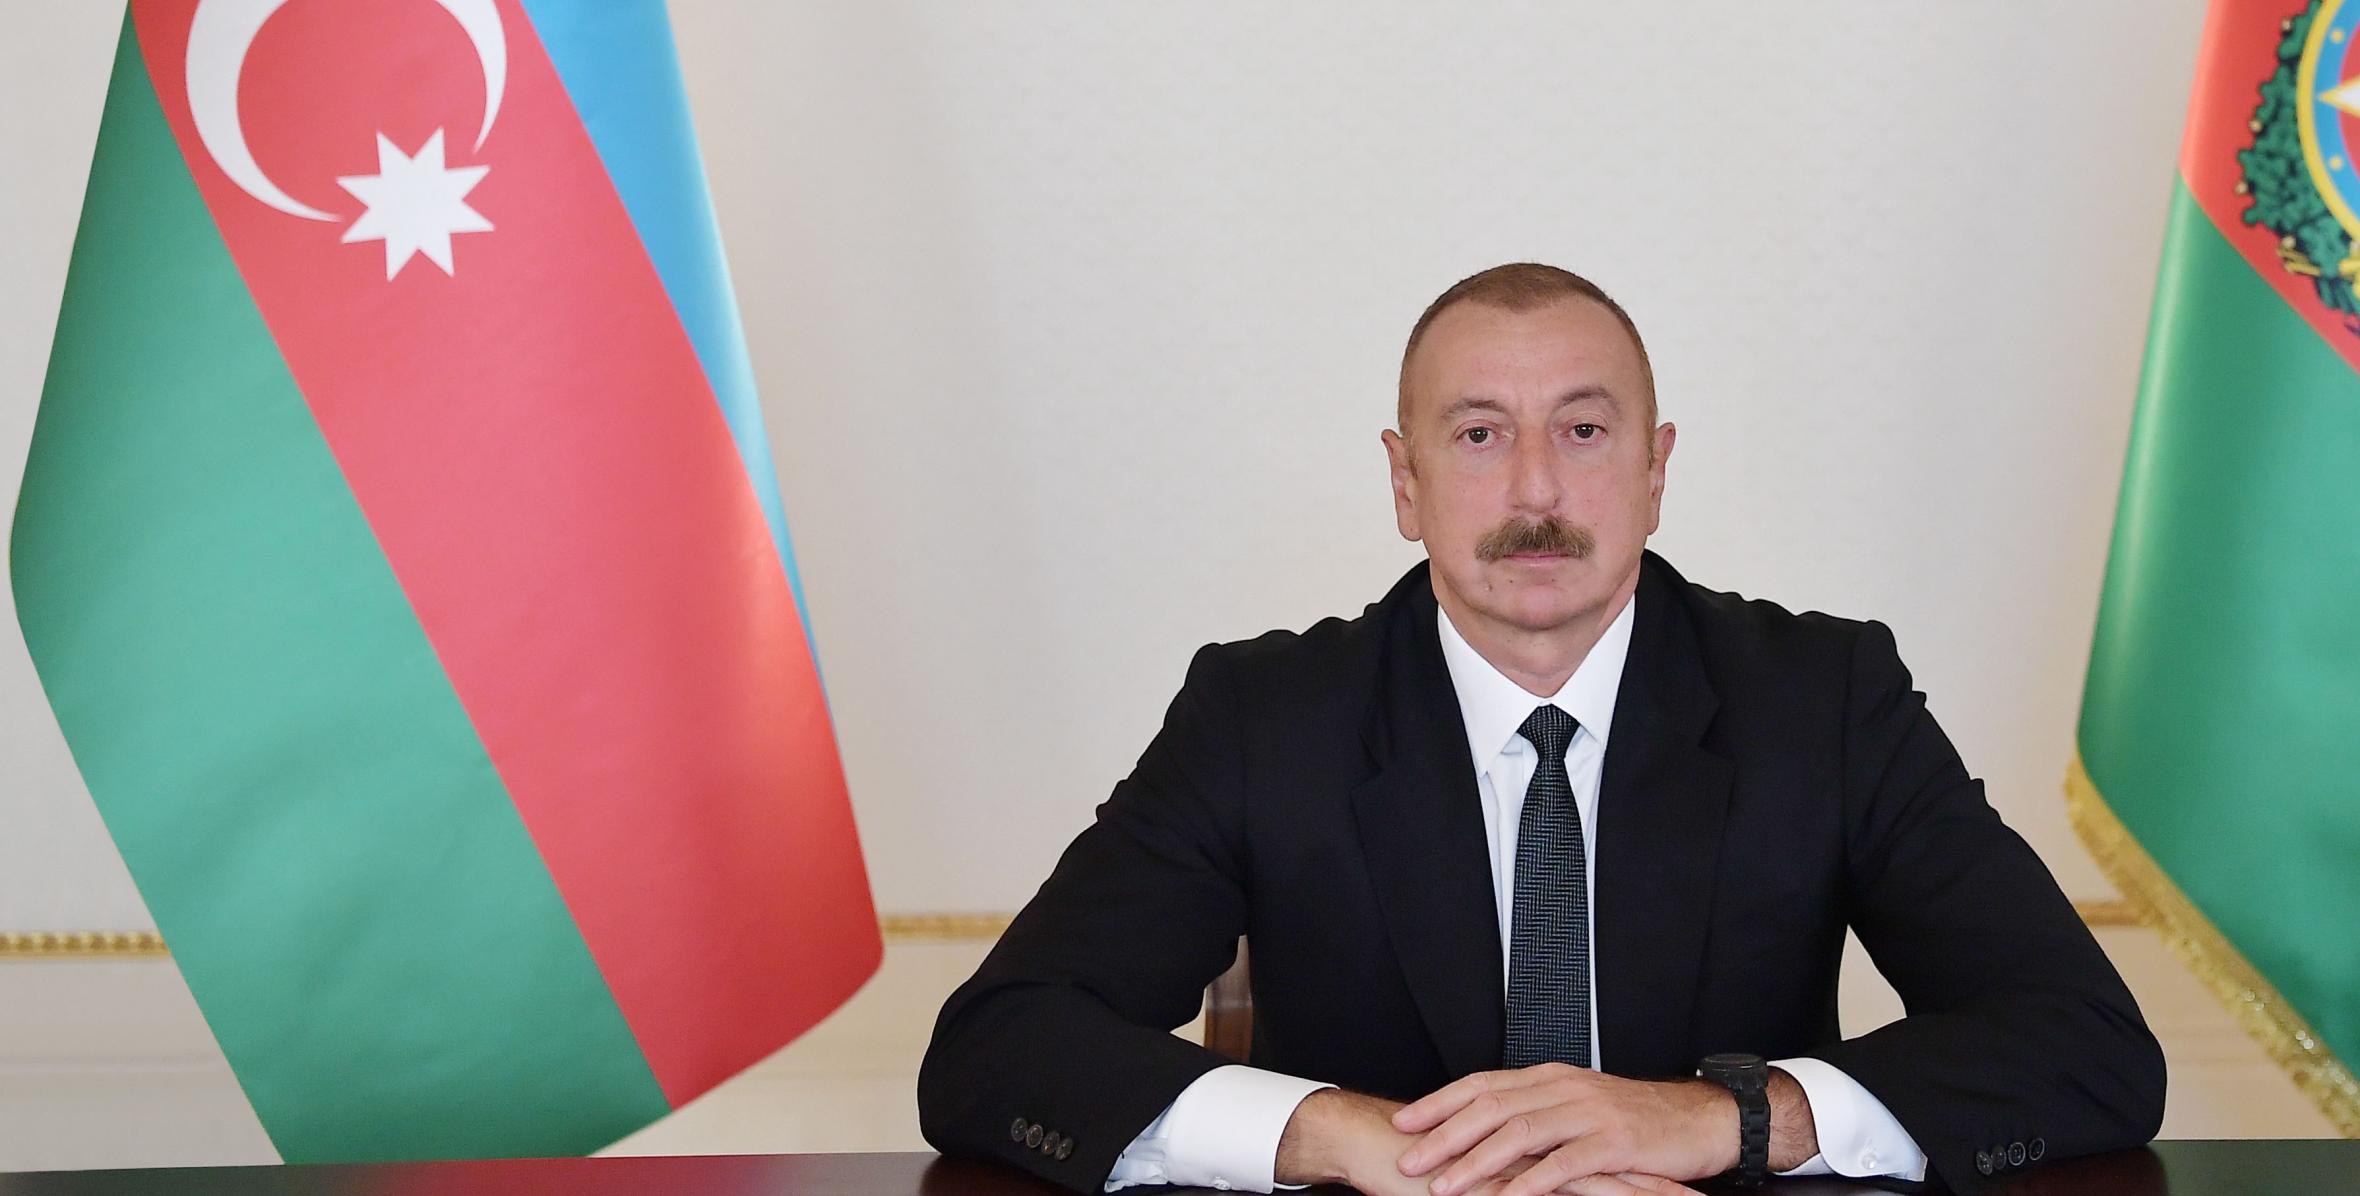 Video message of President Ilham Aliyev was presented at the opening ceremony of 71st IAC 2020